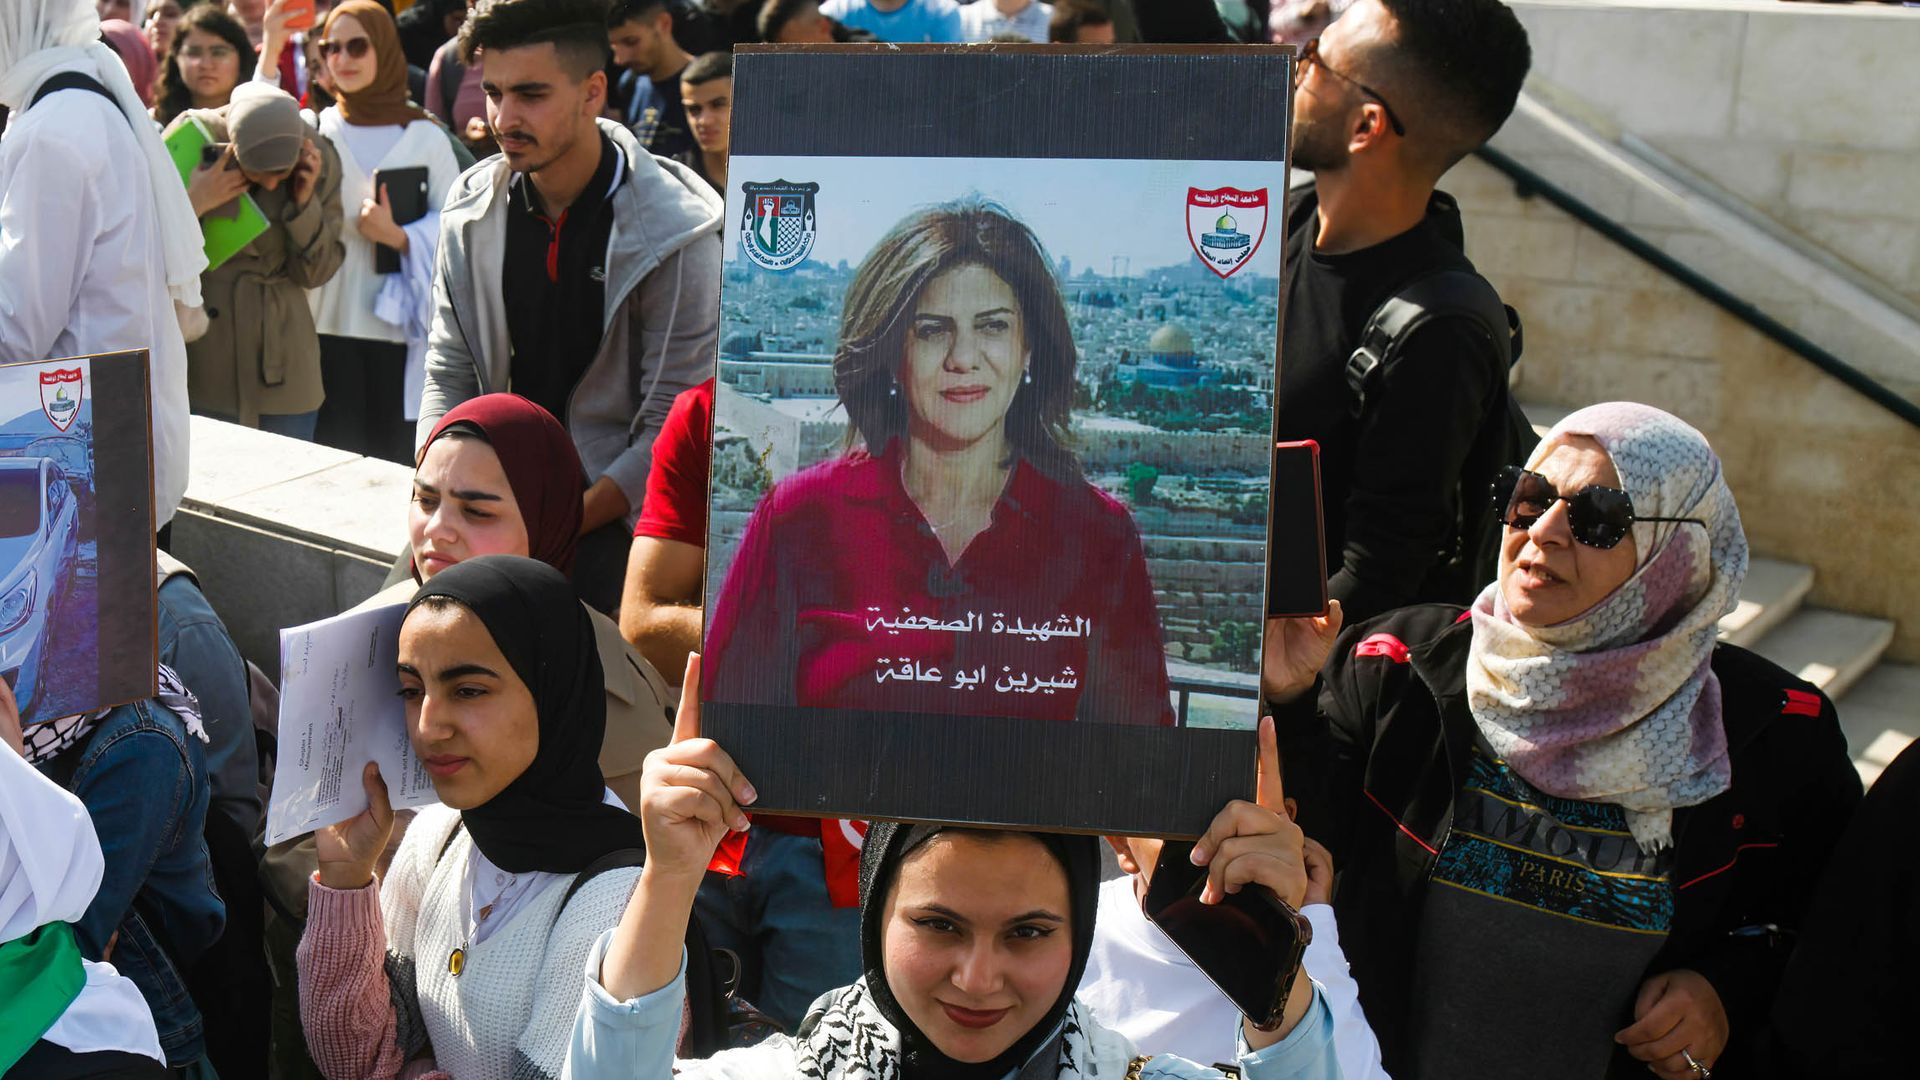 A Palestinian student from An-Najah University holds a picture of Shireen Abu Akleh during a protest in the occupied West Bank city of Nablus on Nov. 6.